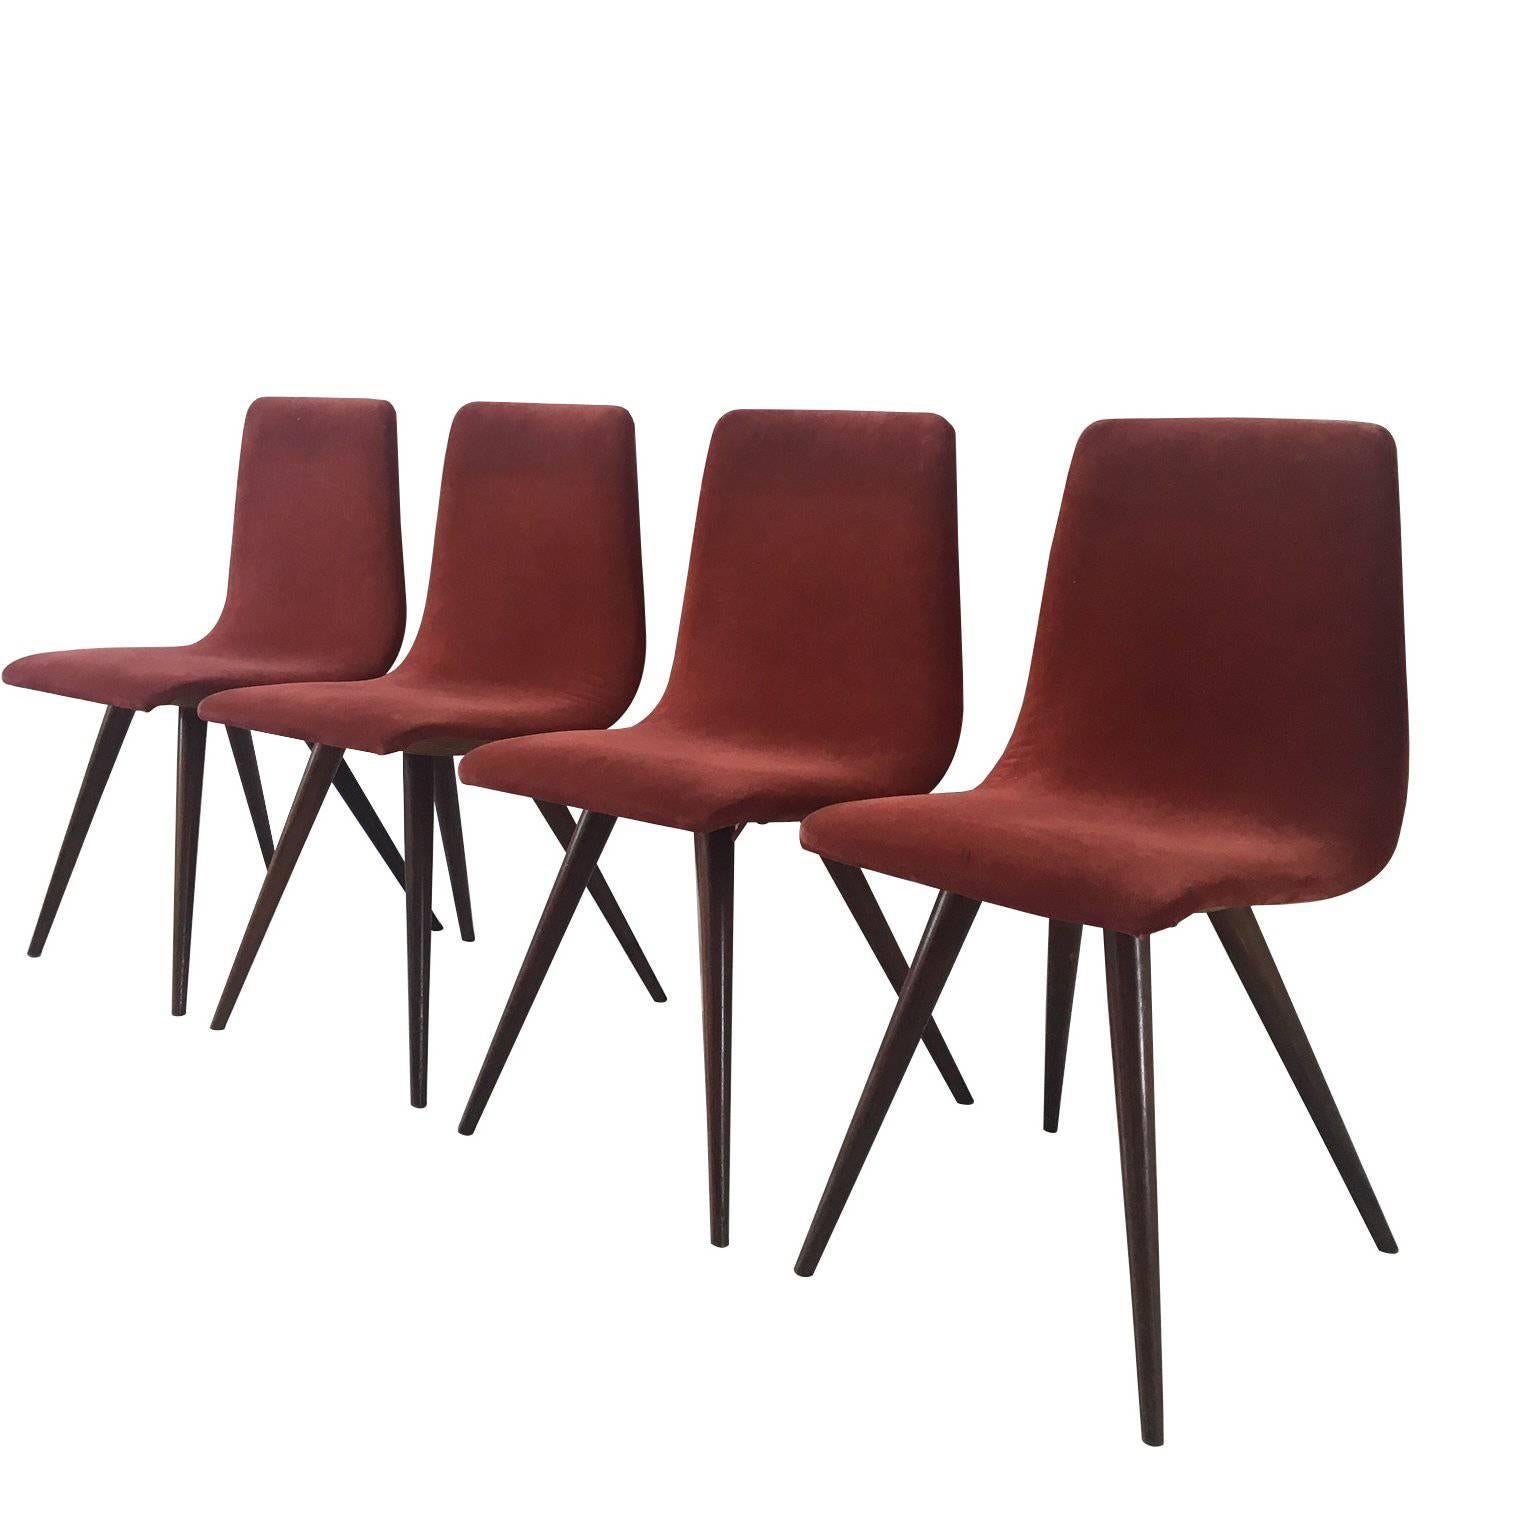 Rare Mid-Century Dining Chairs, Attributed to Gj Van Os, 1950s